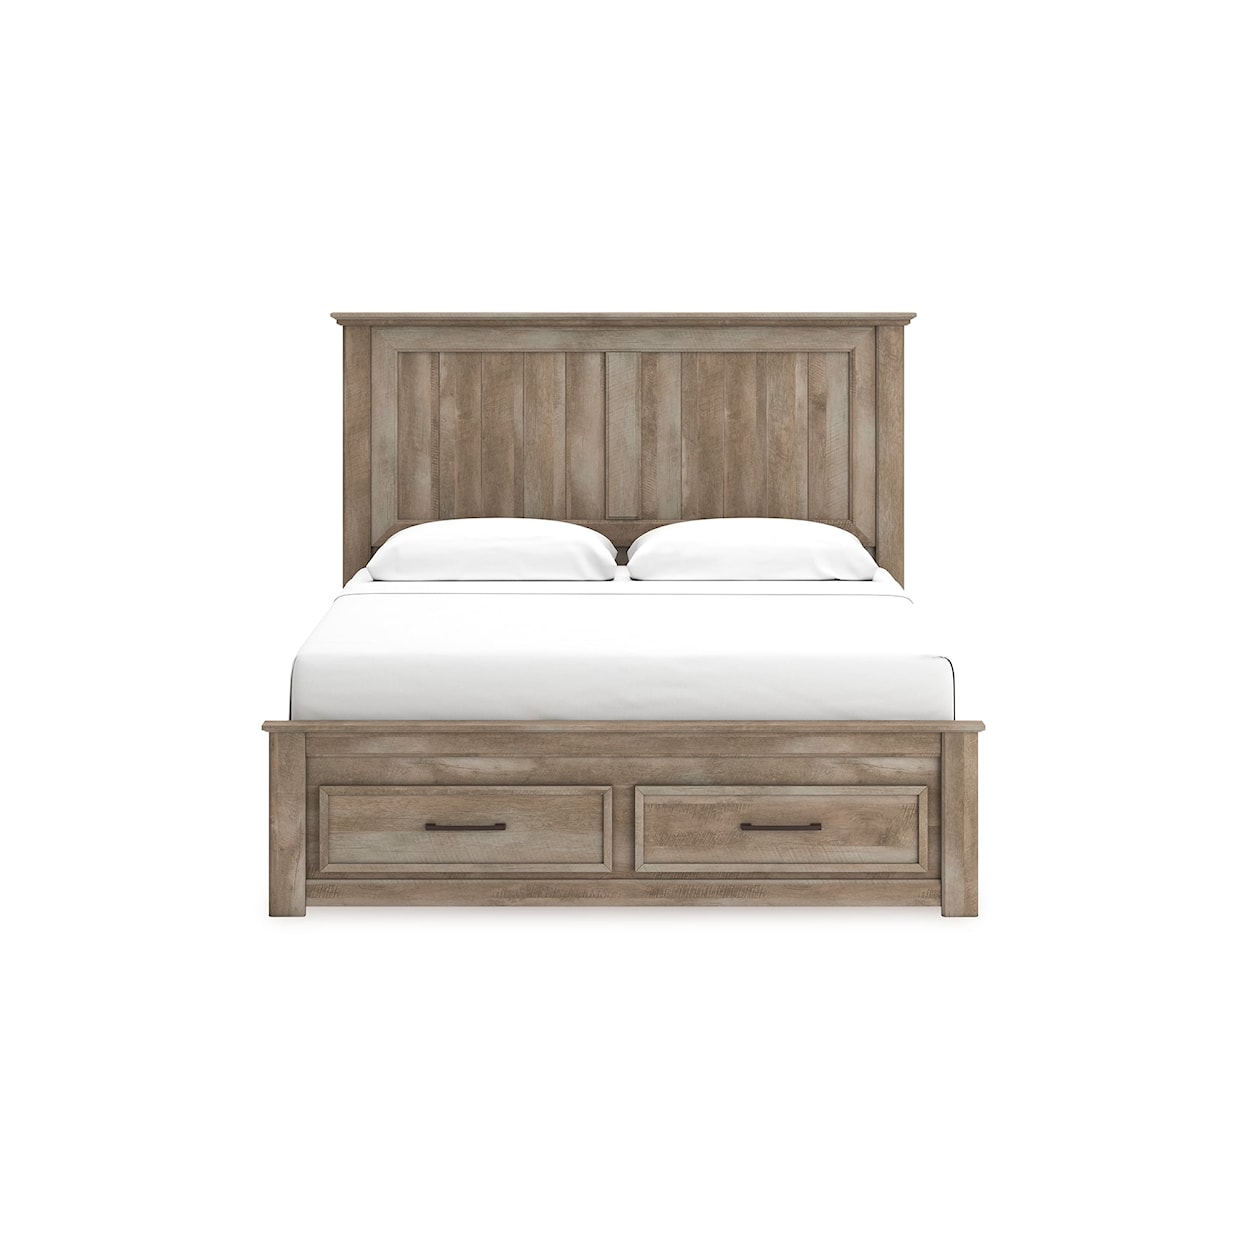 Benchcraft Yarbeck King Panel Bed